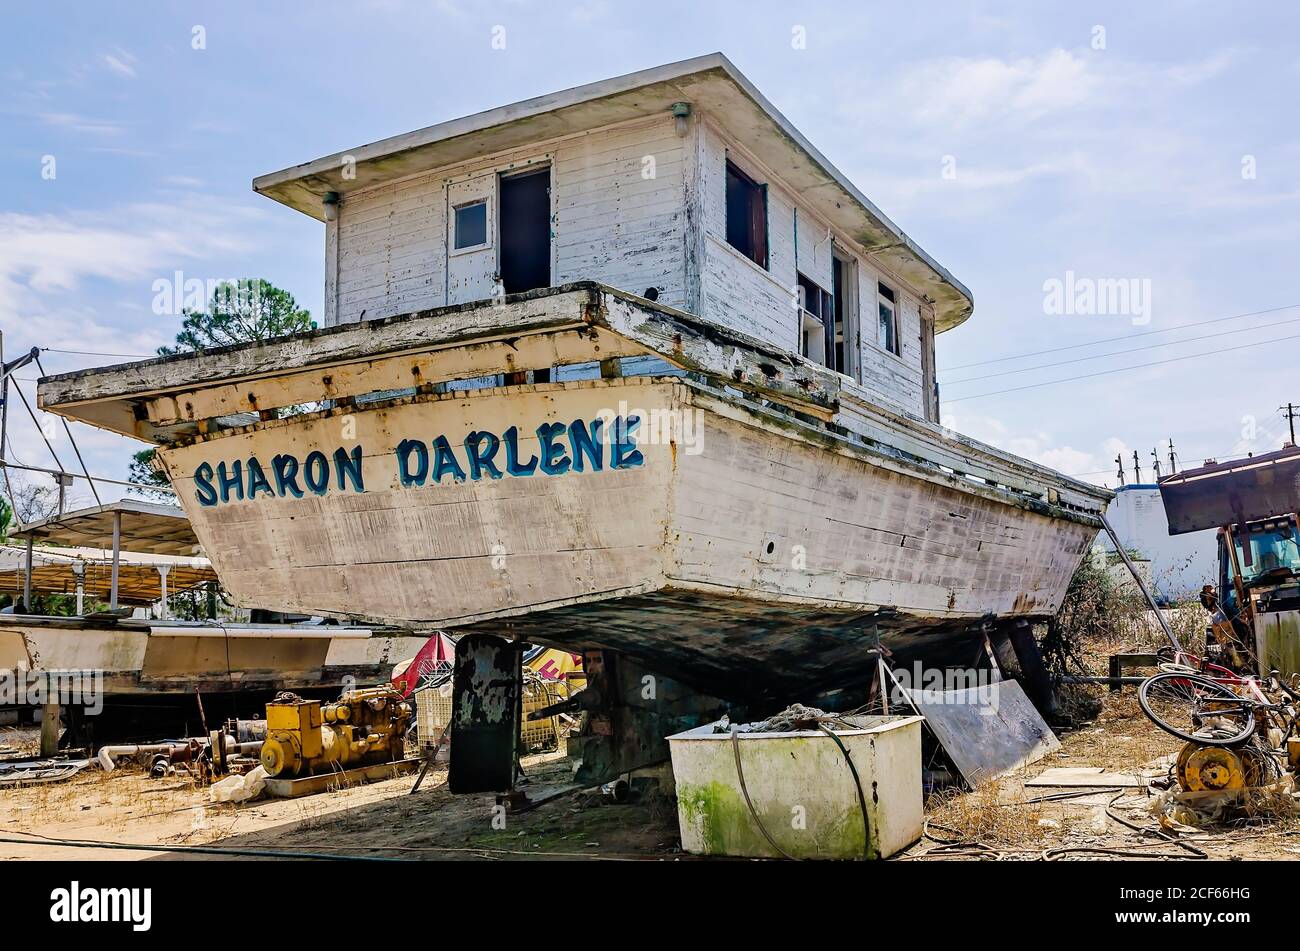 An old wooden shrimp boat sits in dry dock for repair at a local shipyard, Feb. 17, 2018, in Bayou La Batre, Alabama. Stock Photo